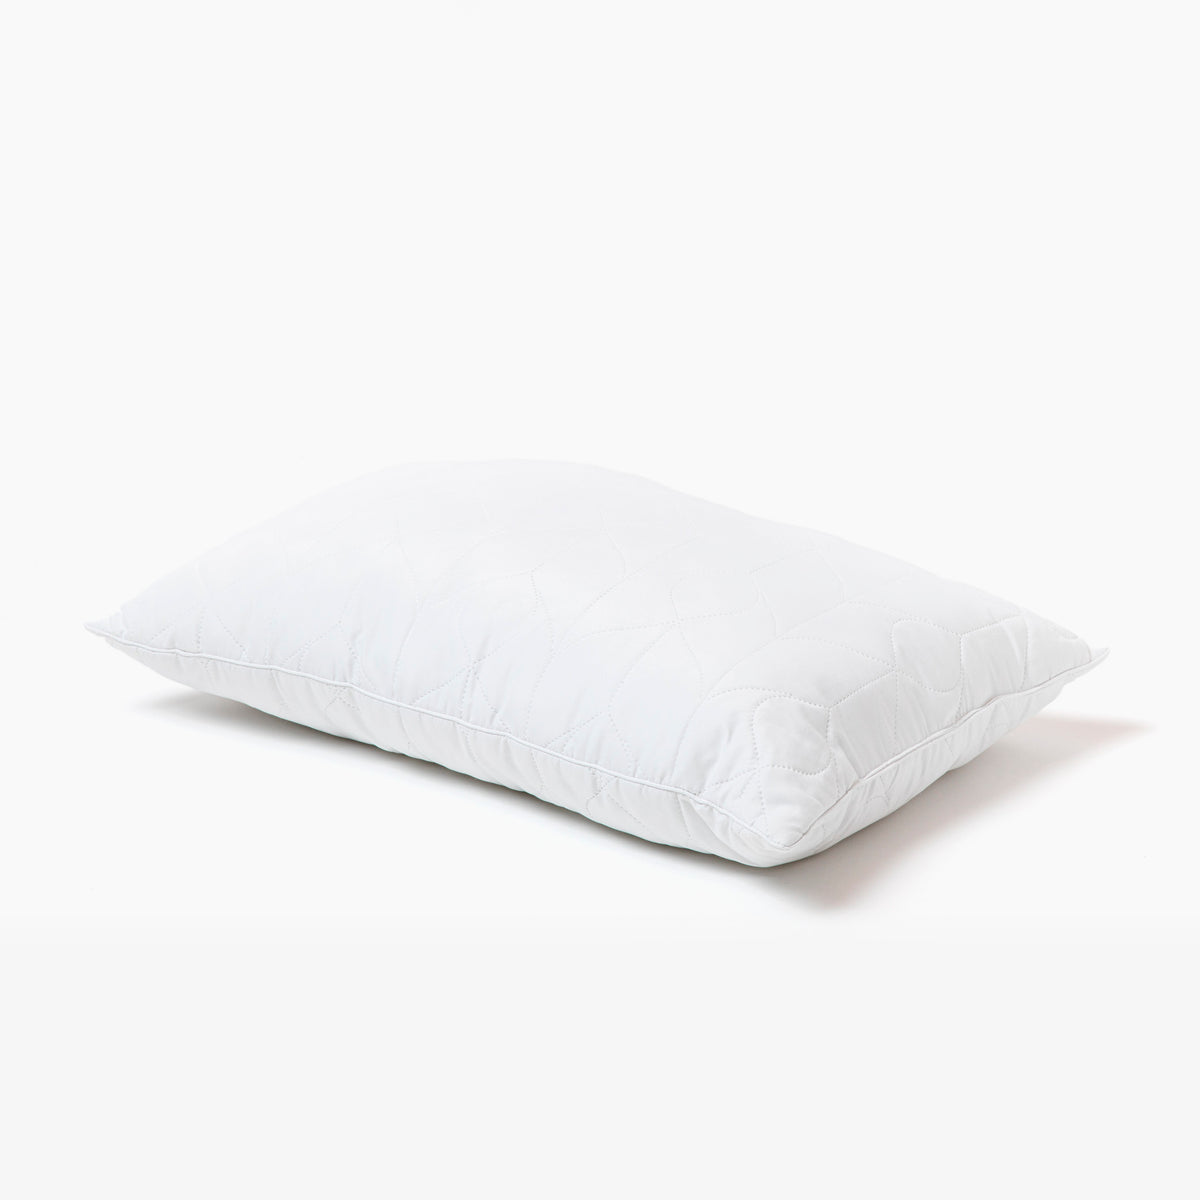 Image of a single Quilted Pillow Insert on a white background